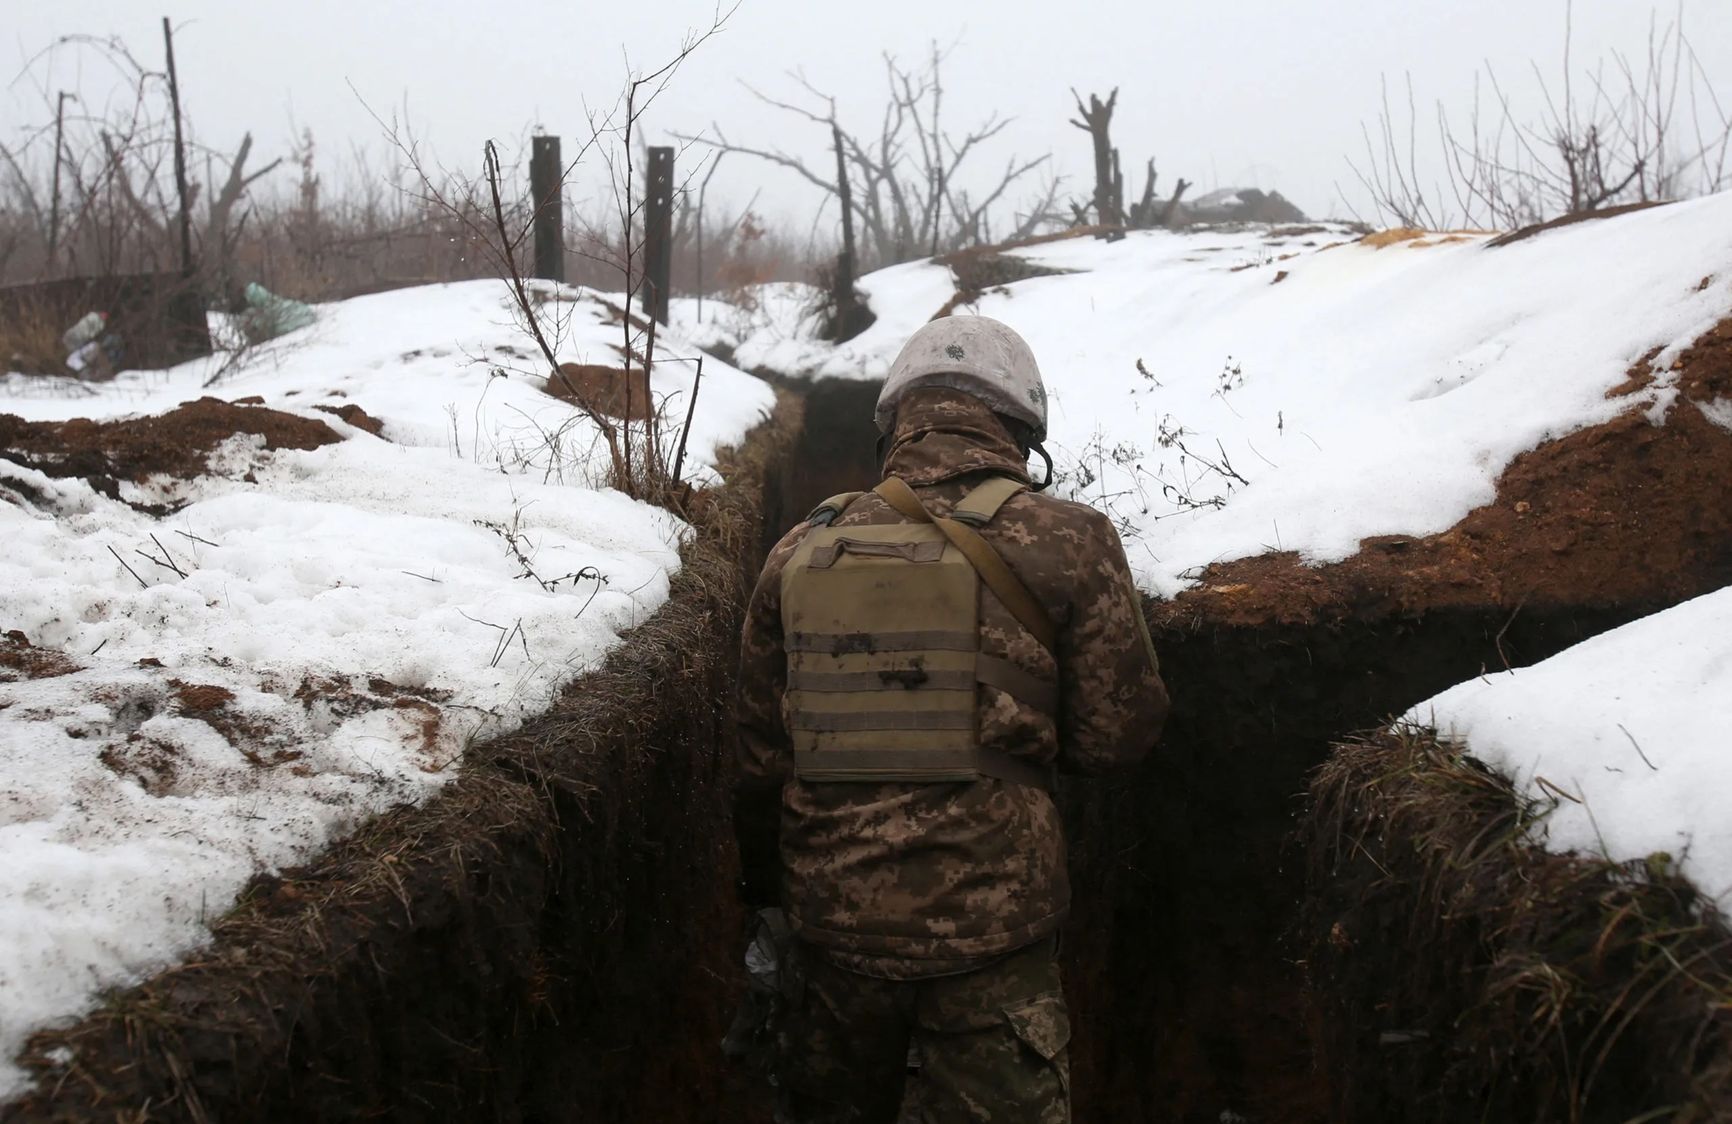 Ukrainian trenches in March. Location unspecified